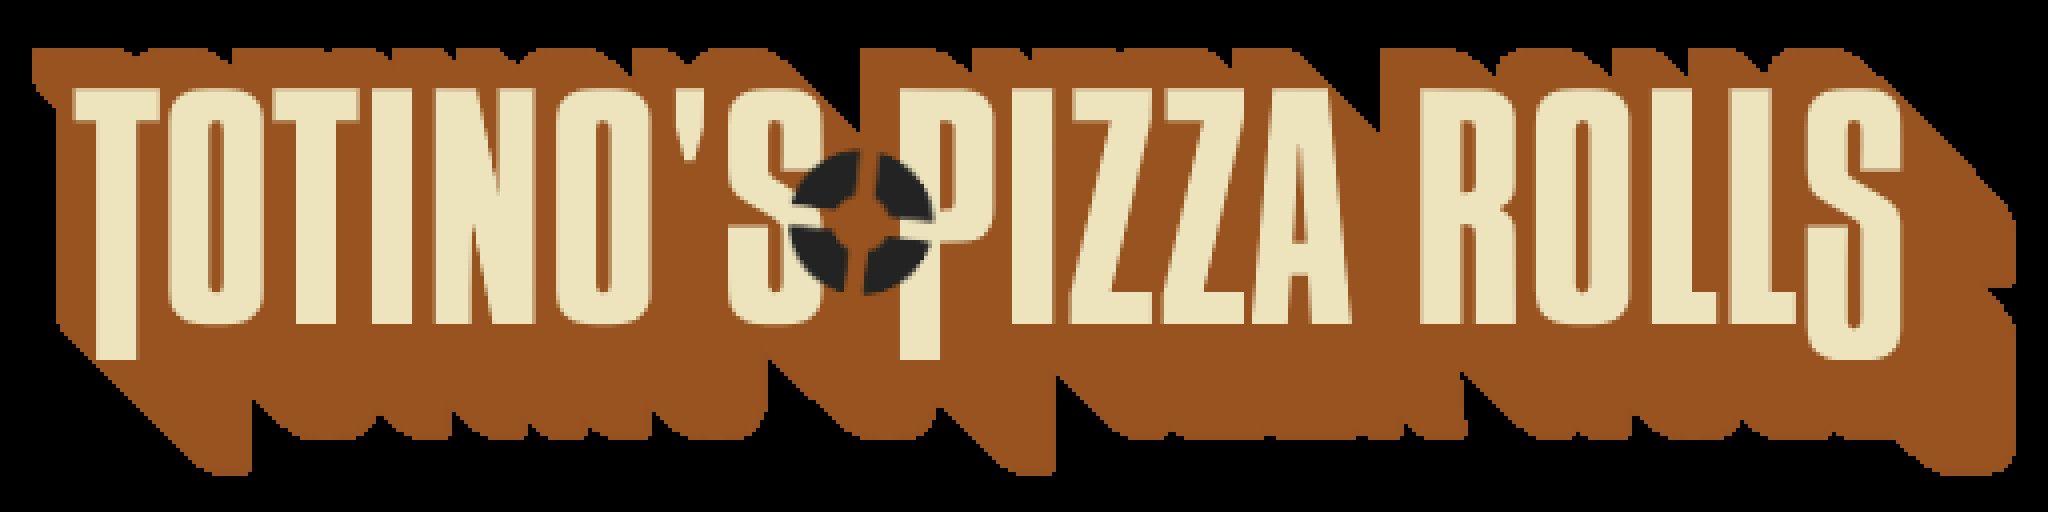 Totino's Logo - Totino's Pizza Rolls logo replacement | Team Fortress 2 GUI Mods